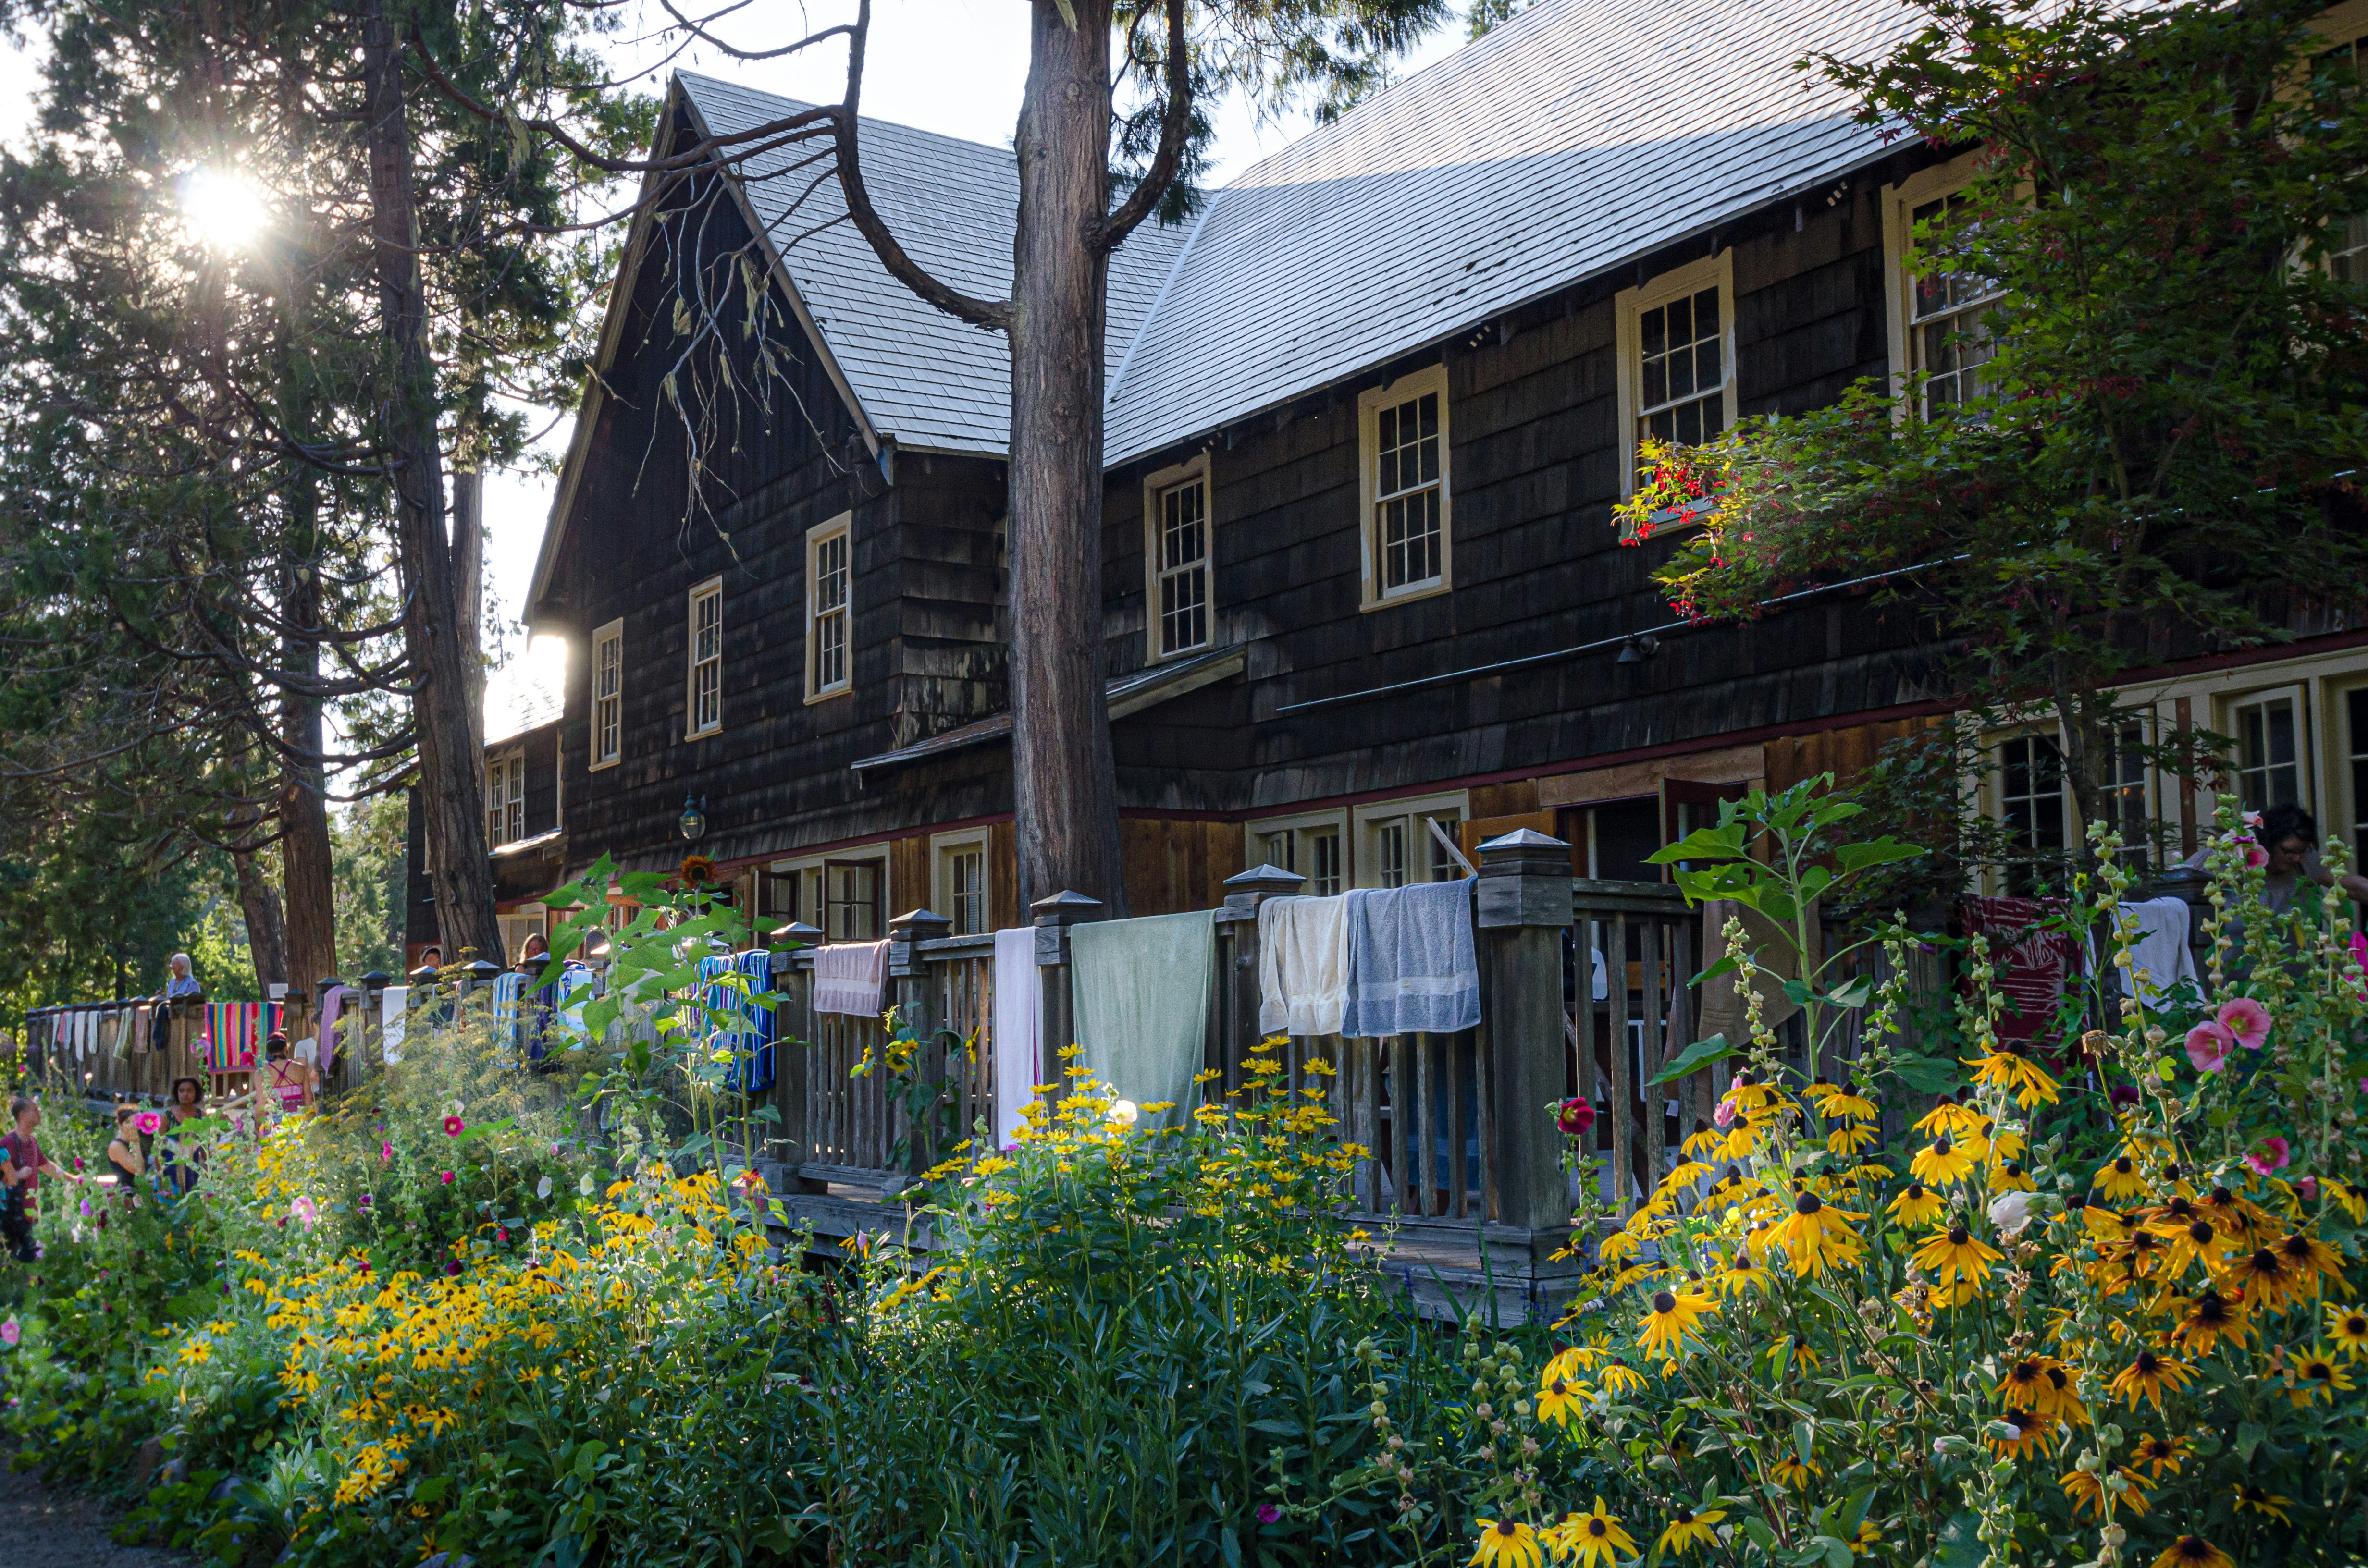 The wood-shingled and charmingly weathered exterior of Breitenbush Hot Springs lodge, with towels from bathers draped in front amid shocks of yellow wildflowers, the sun flaring through the trees in the upper left of the frame.